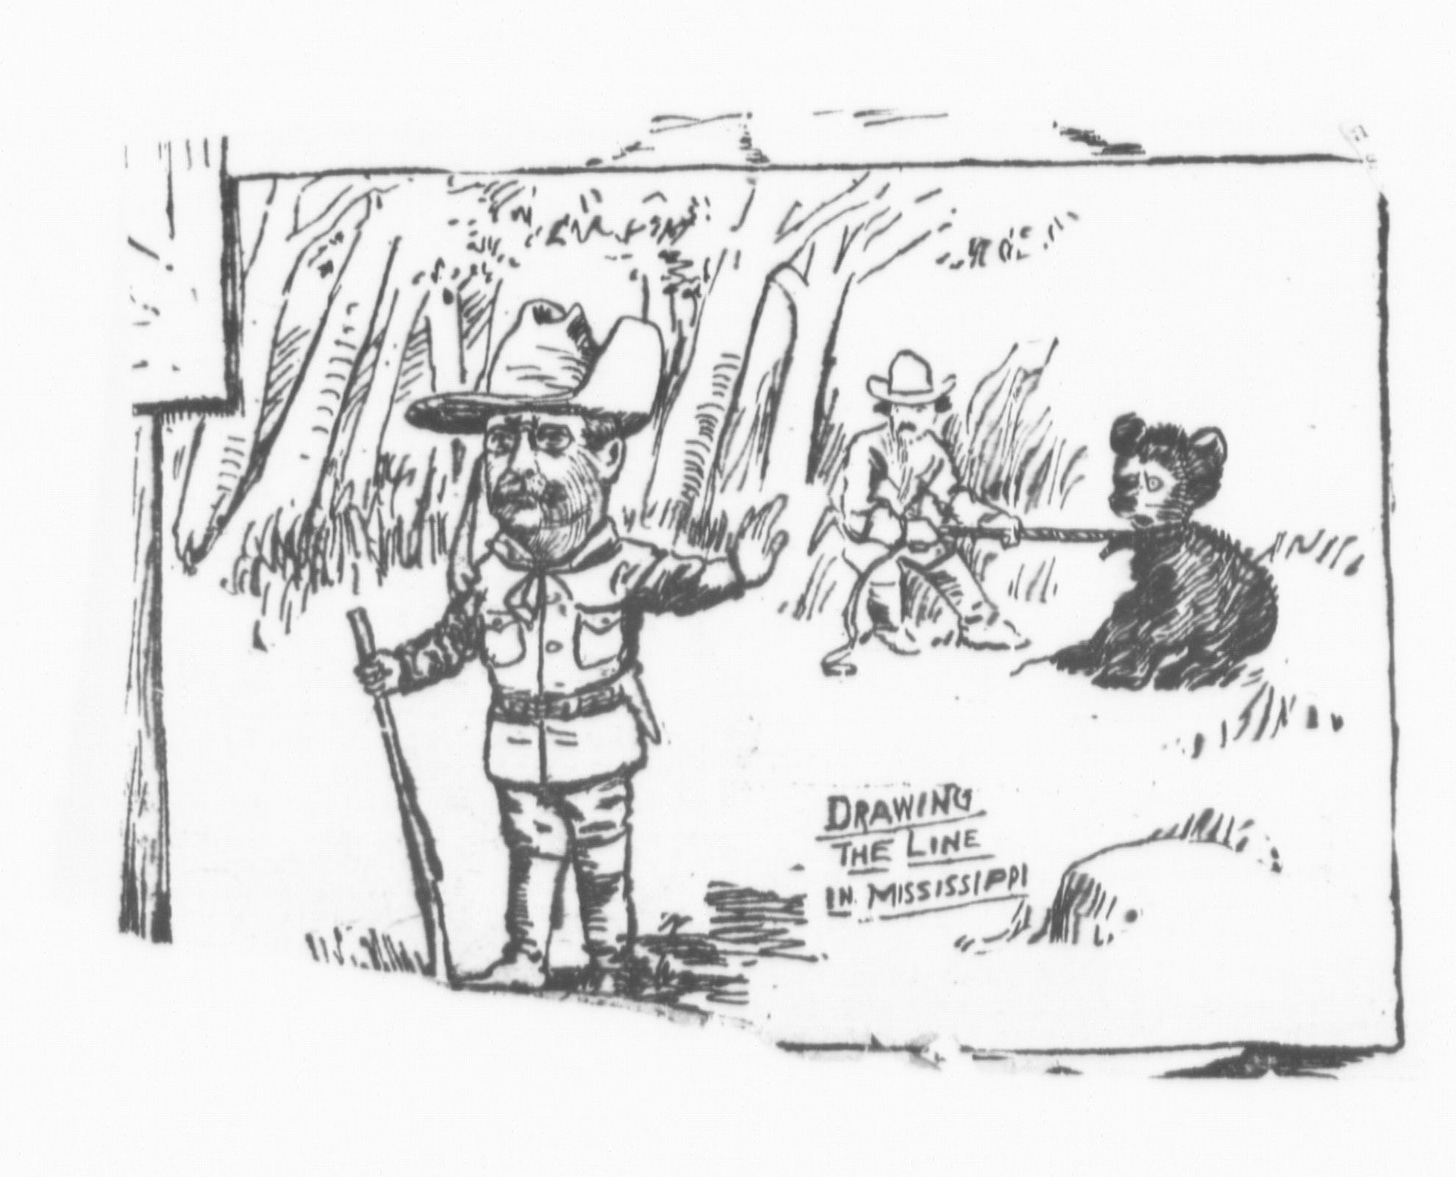 A cartoon of Theodore Roosevelt refusing to shoot a bear that is tied up. The cartoon is entitled "Drawing the Line in Mississippi."